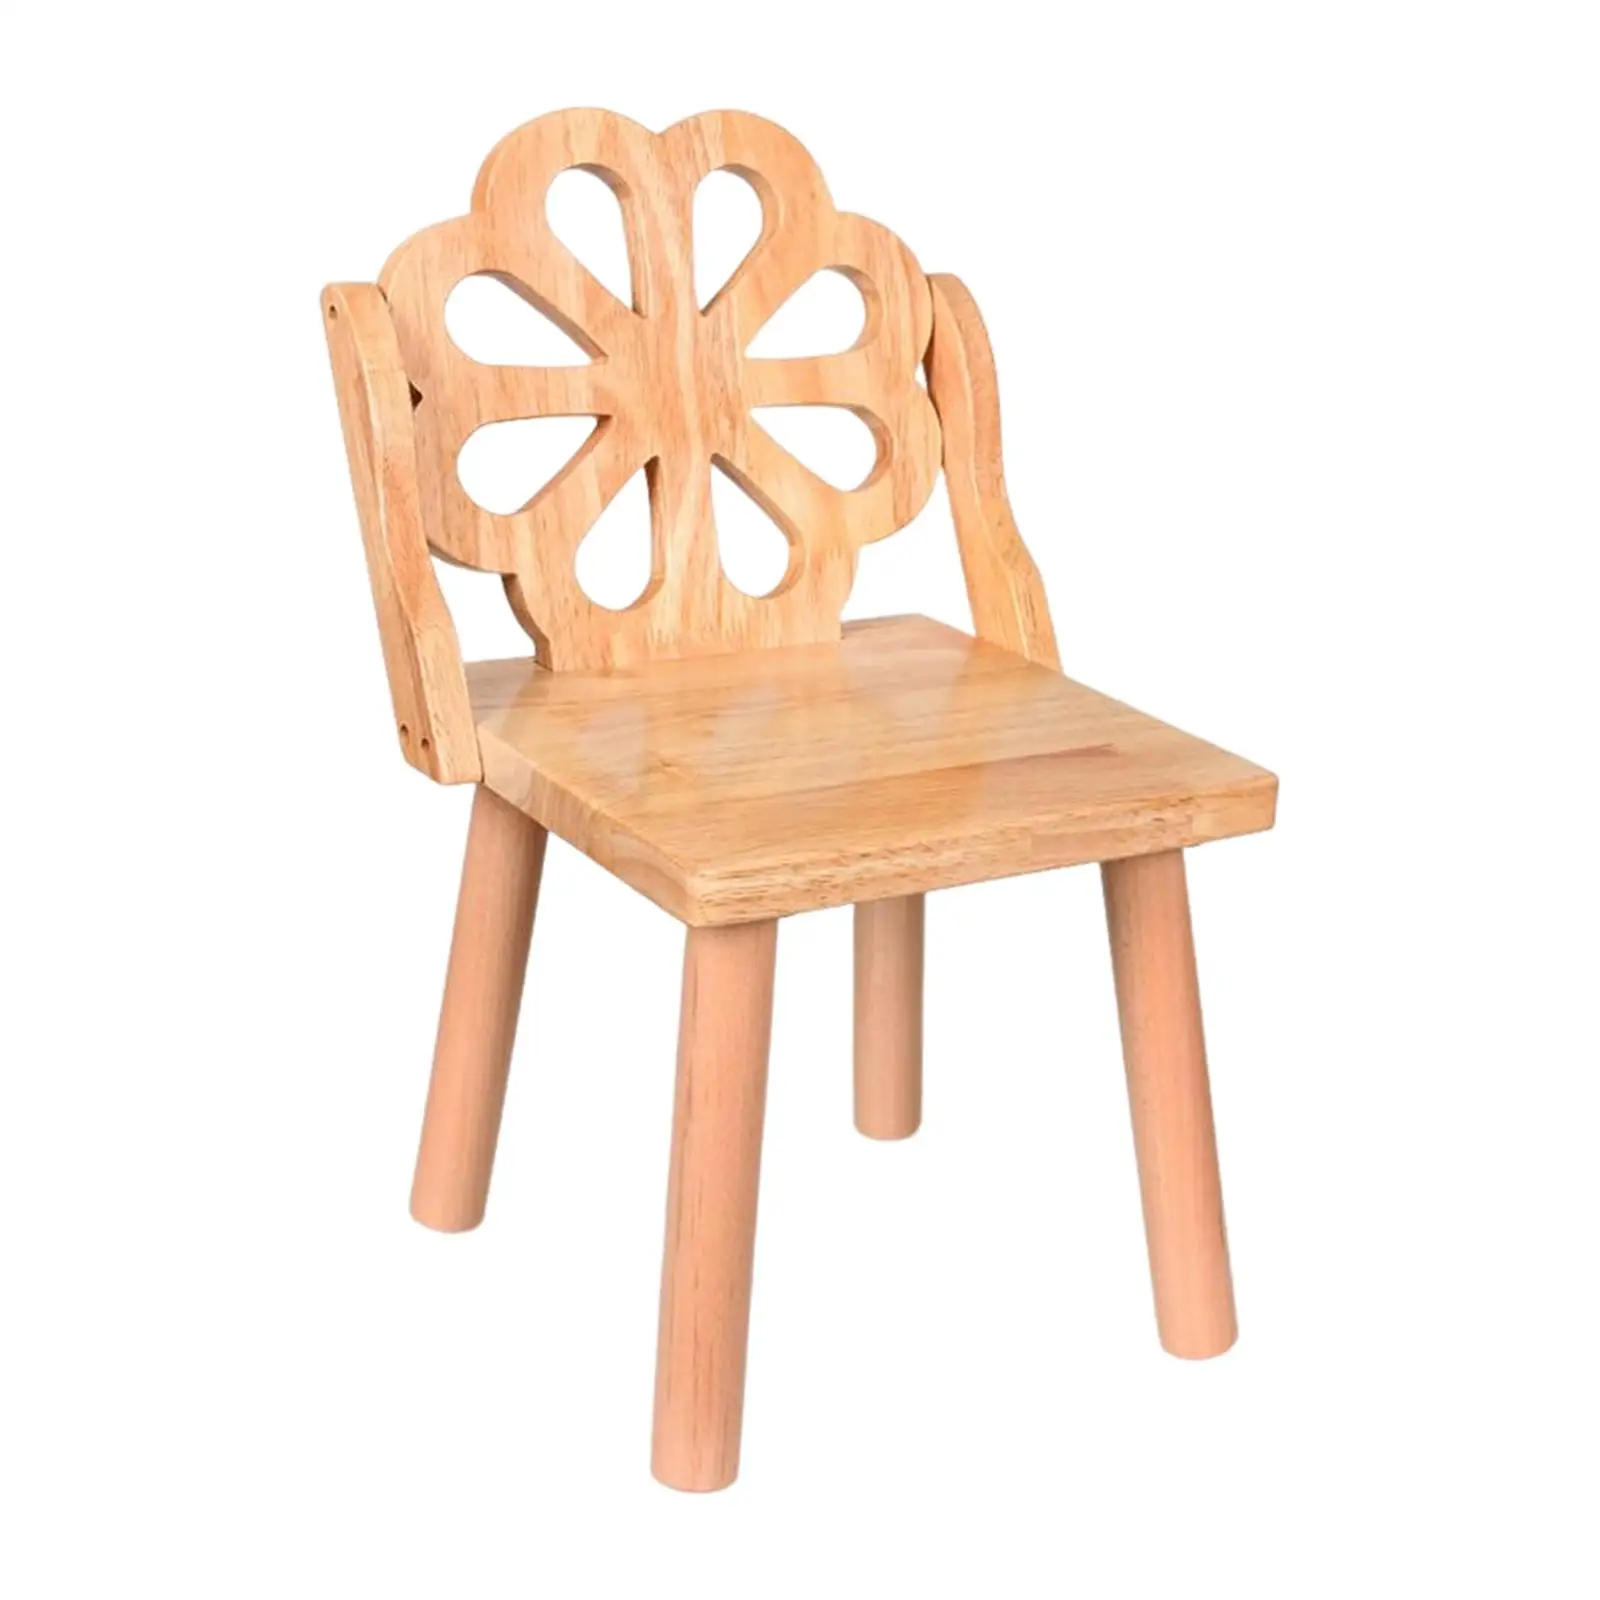 Household Removable Wooden Child Stool Heavy Duty Wood High Chair Anti Slip Lightweight Durable Wooden Wooden Toys for Children